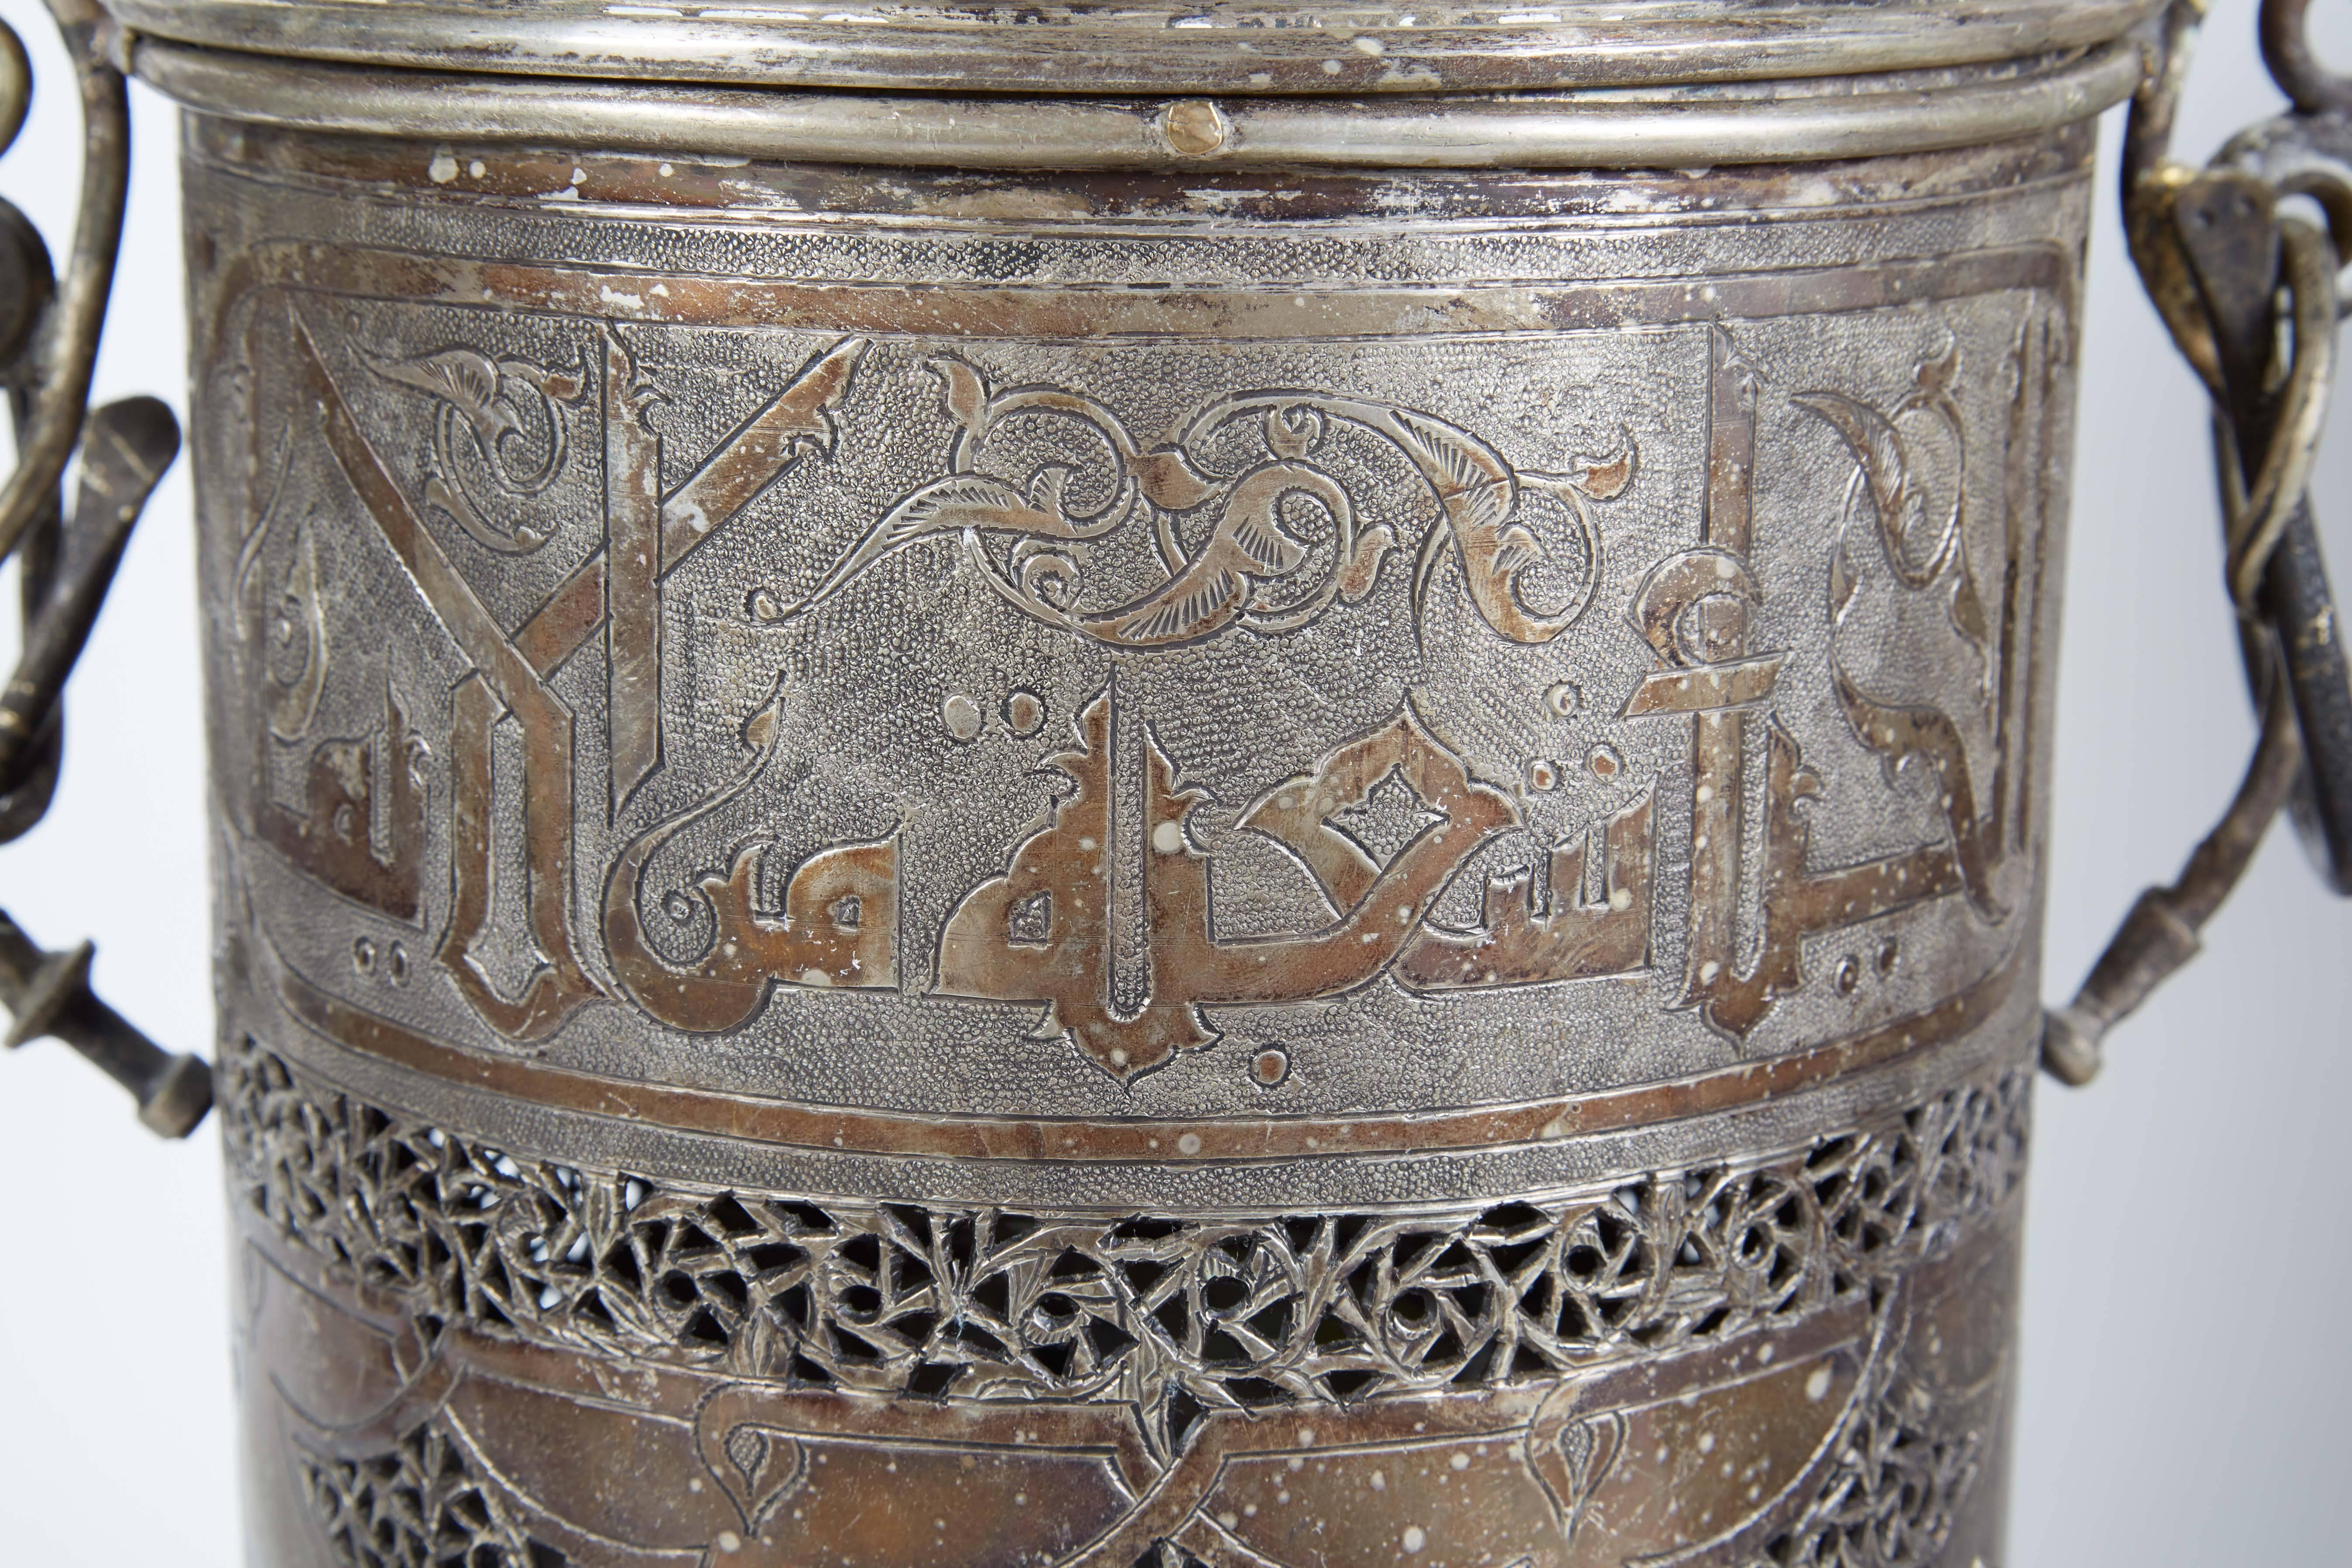 Pair of Antique Islamic Persian Silver Incense Burners with Arabic Calligraphy 2